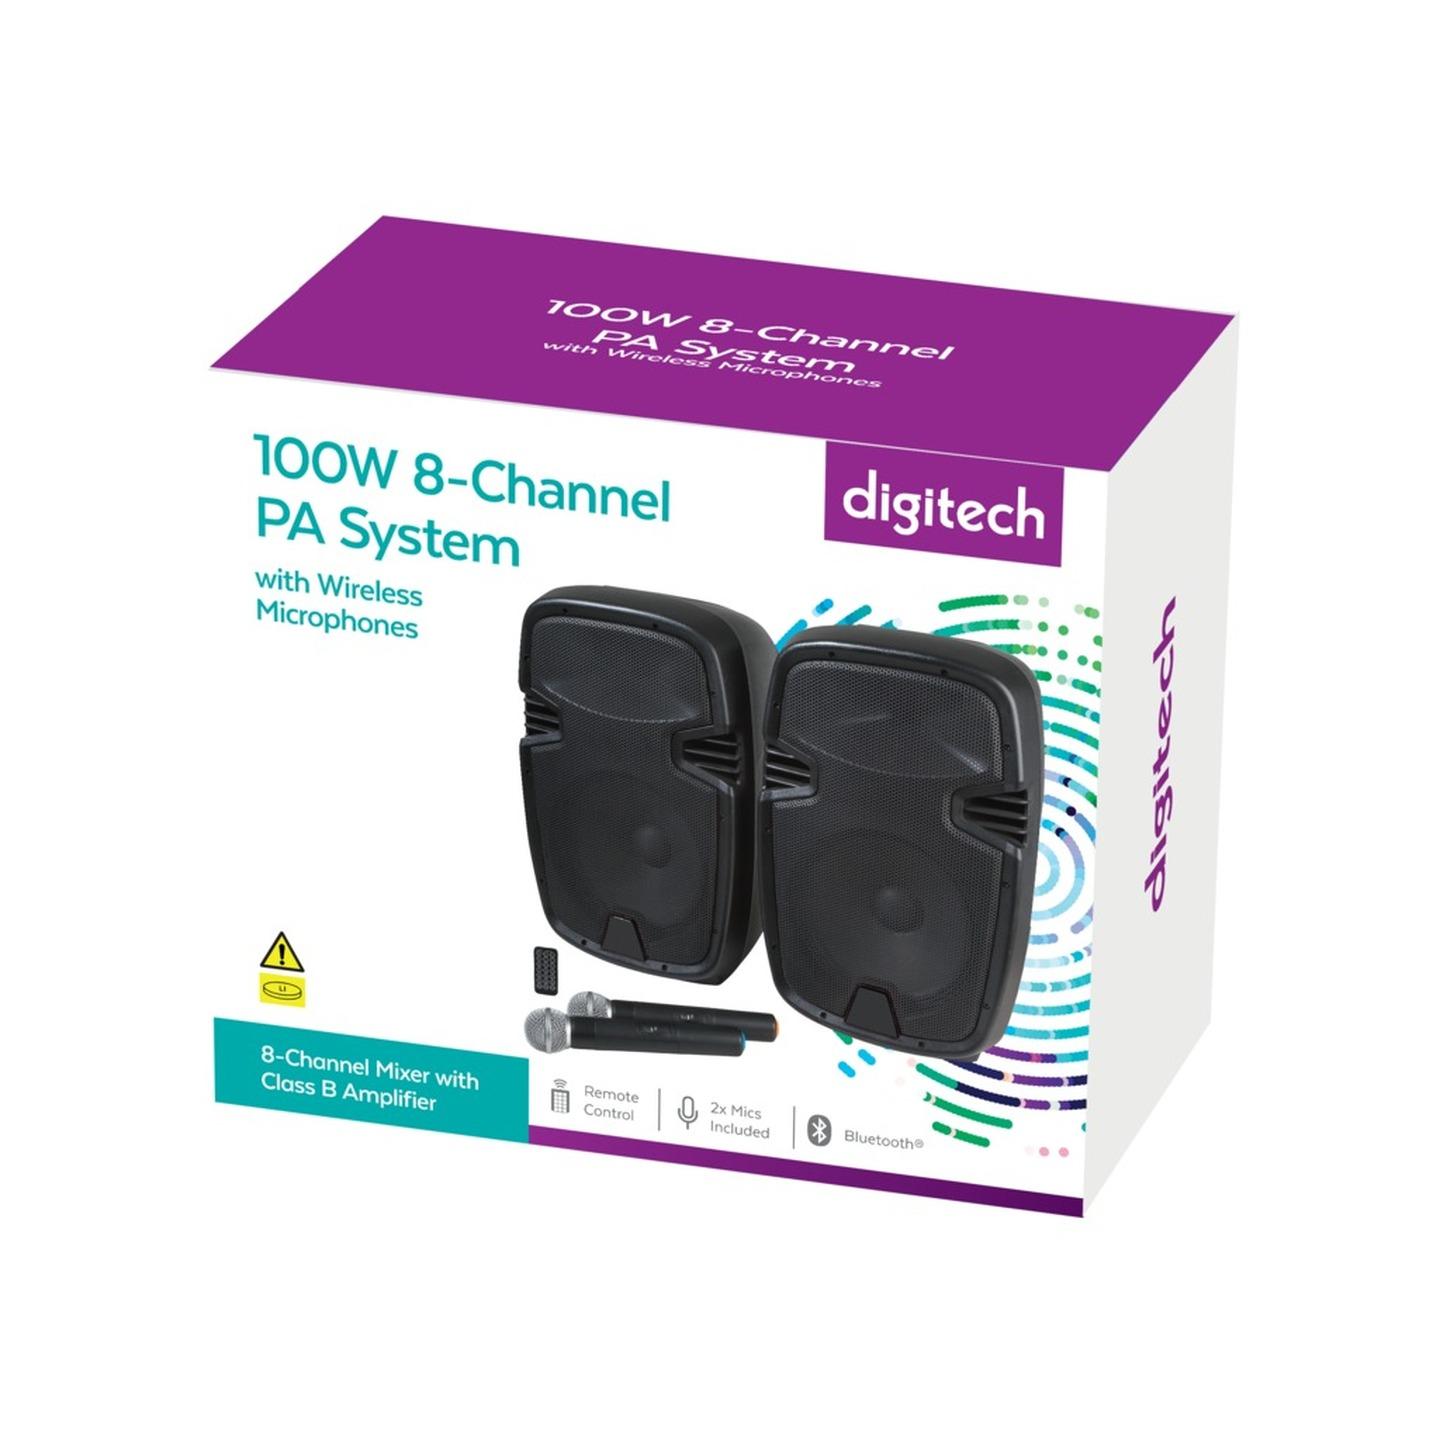 10 Inch 100W 8 Channel PA System with Wireless Microphones